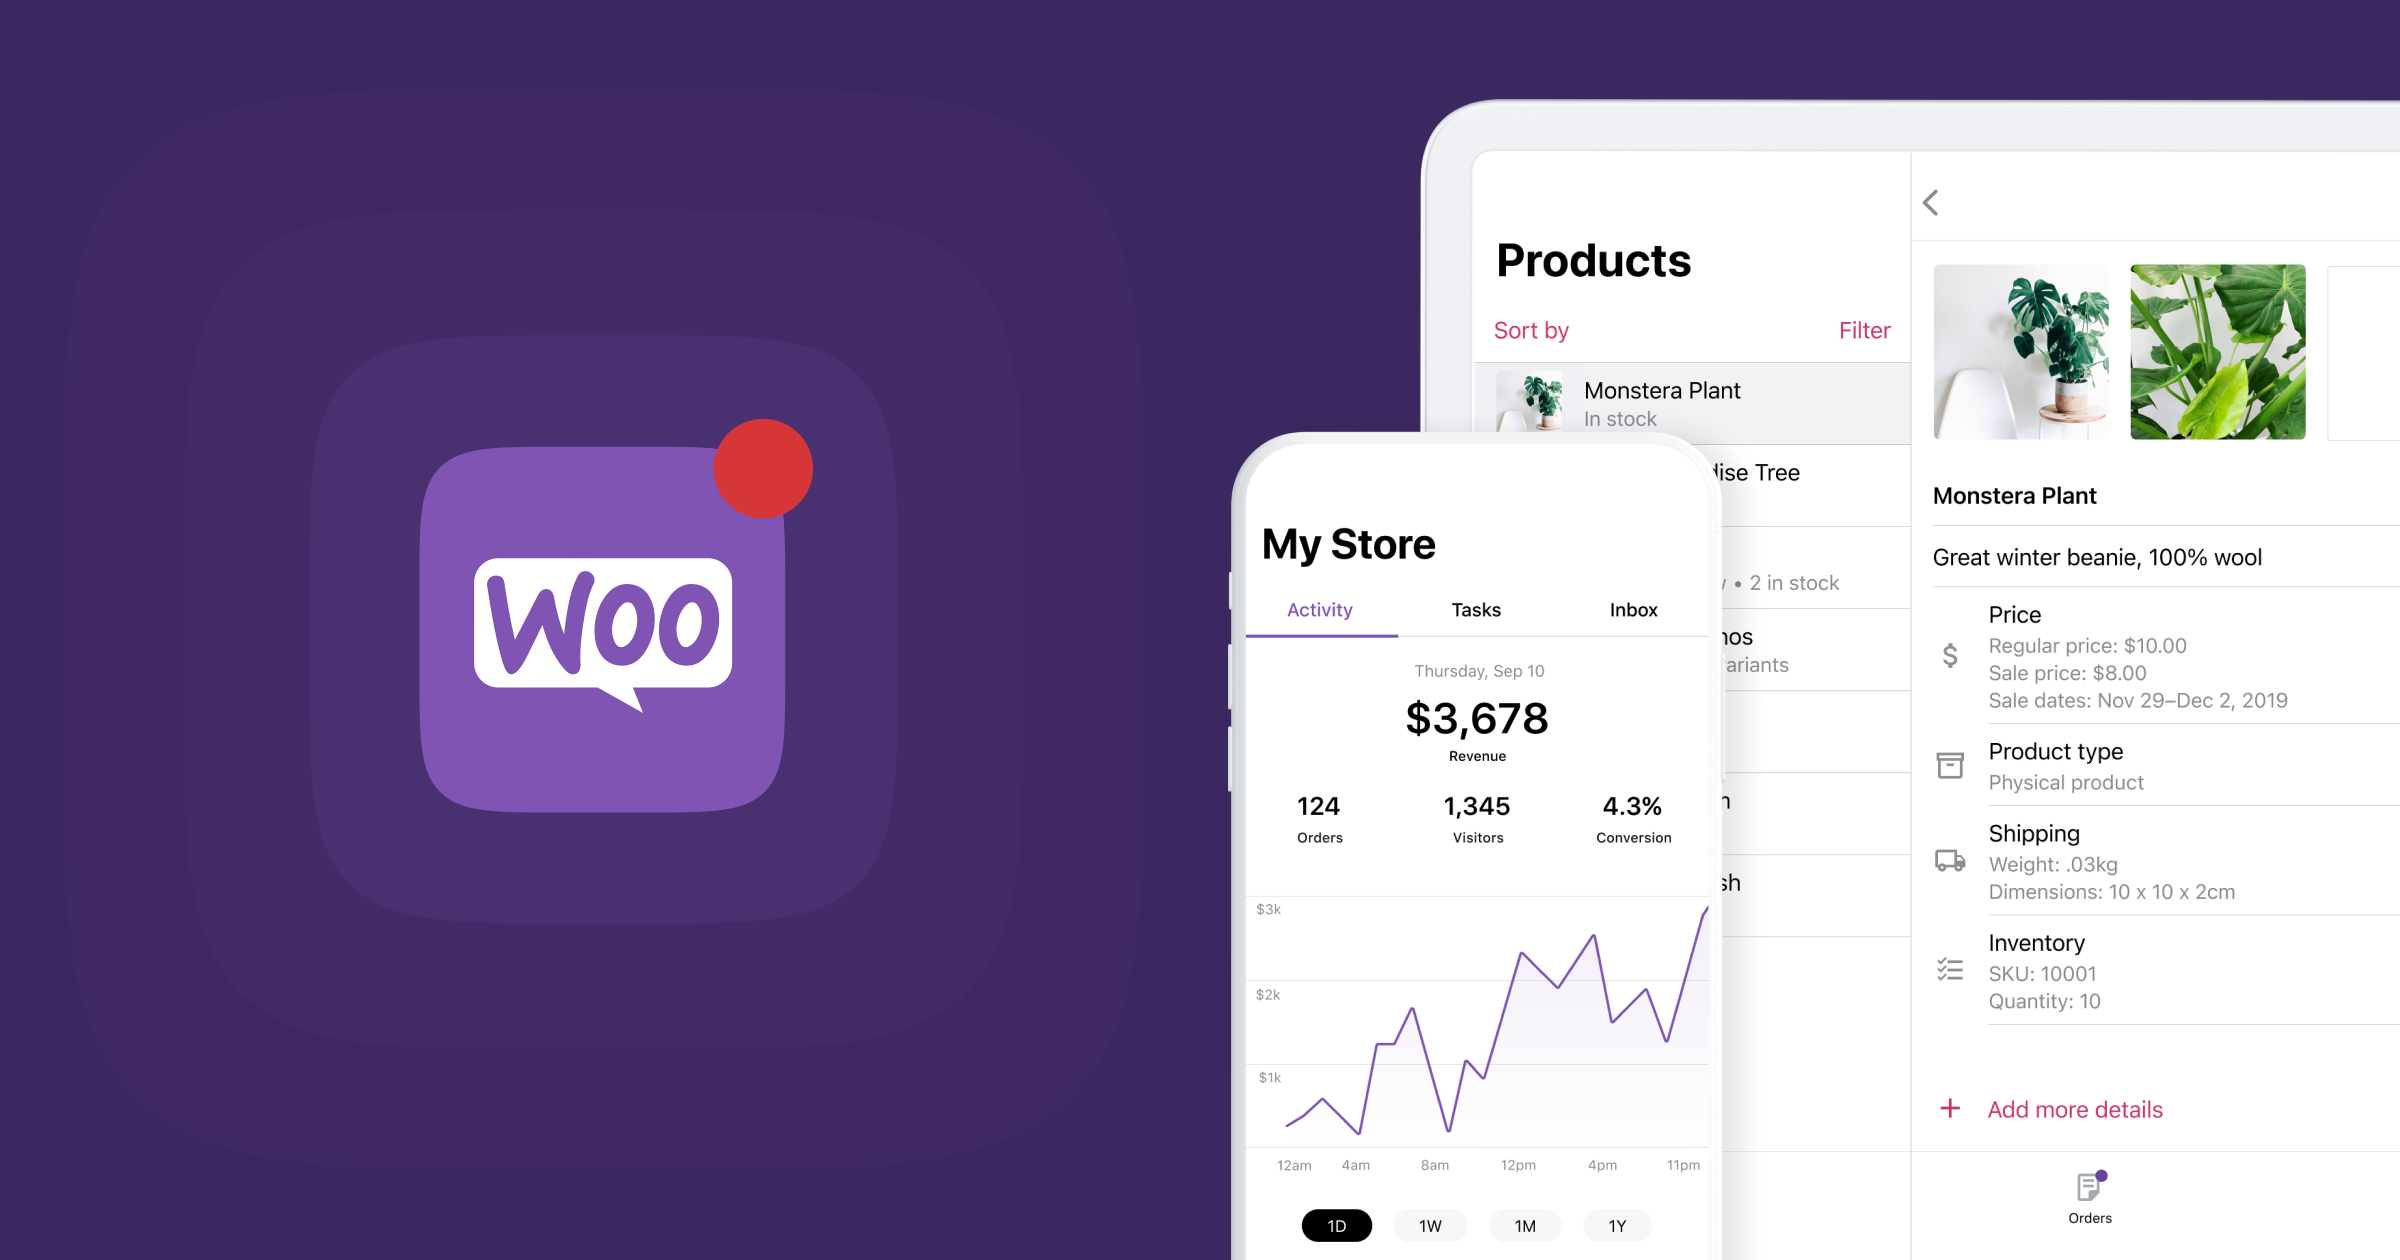 extensions and add-ons available for WooCommerce